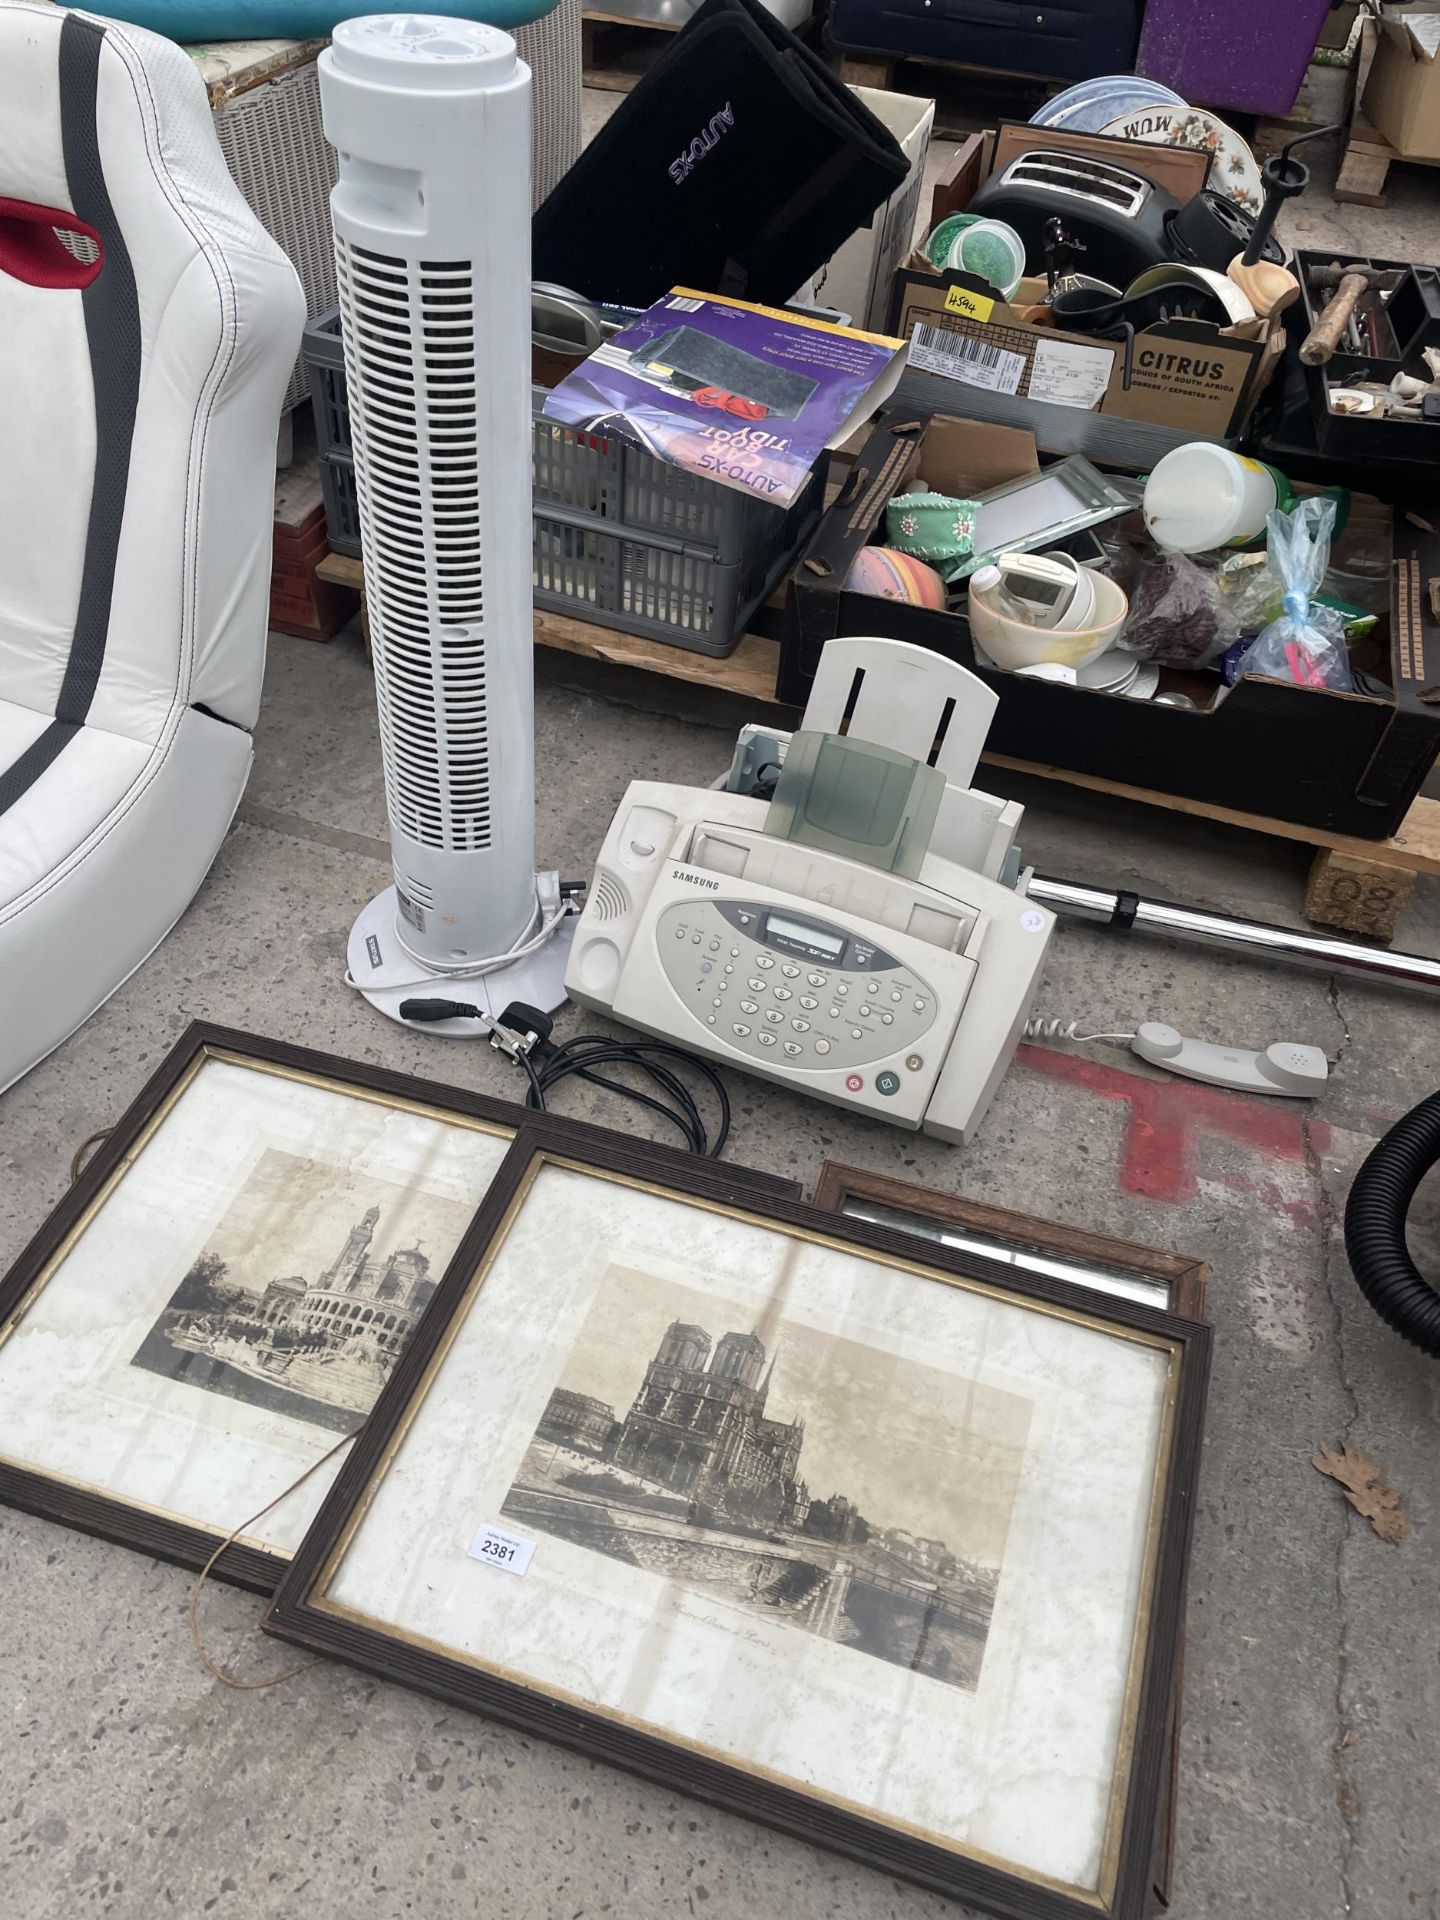 A FAN, A FAX MACHINE AND TWO FRAMED PRINTS ETC